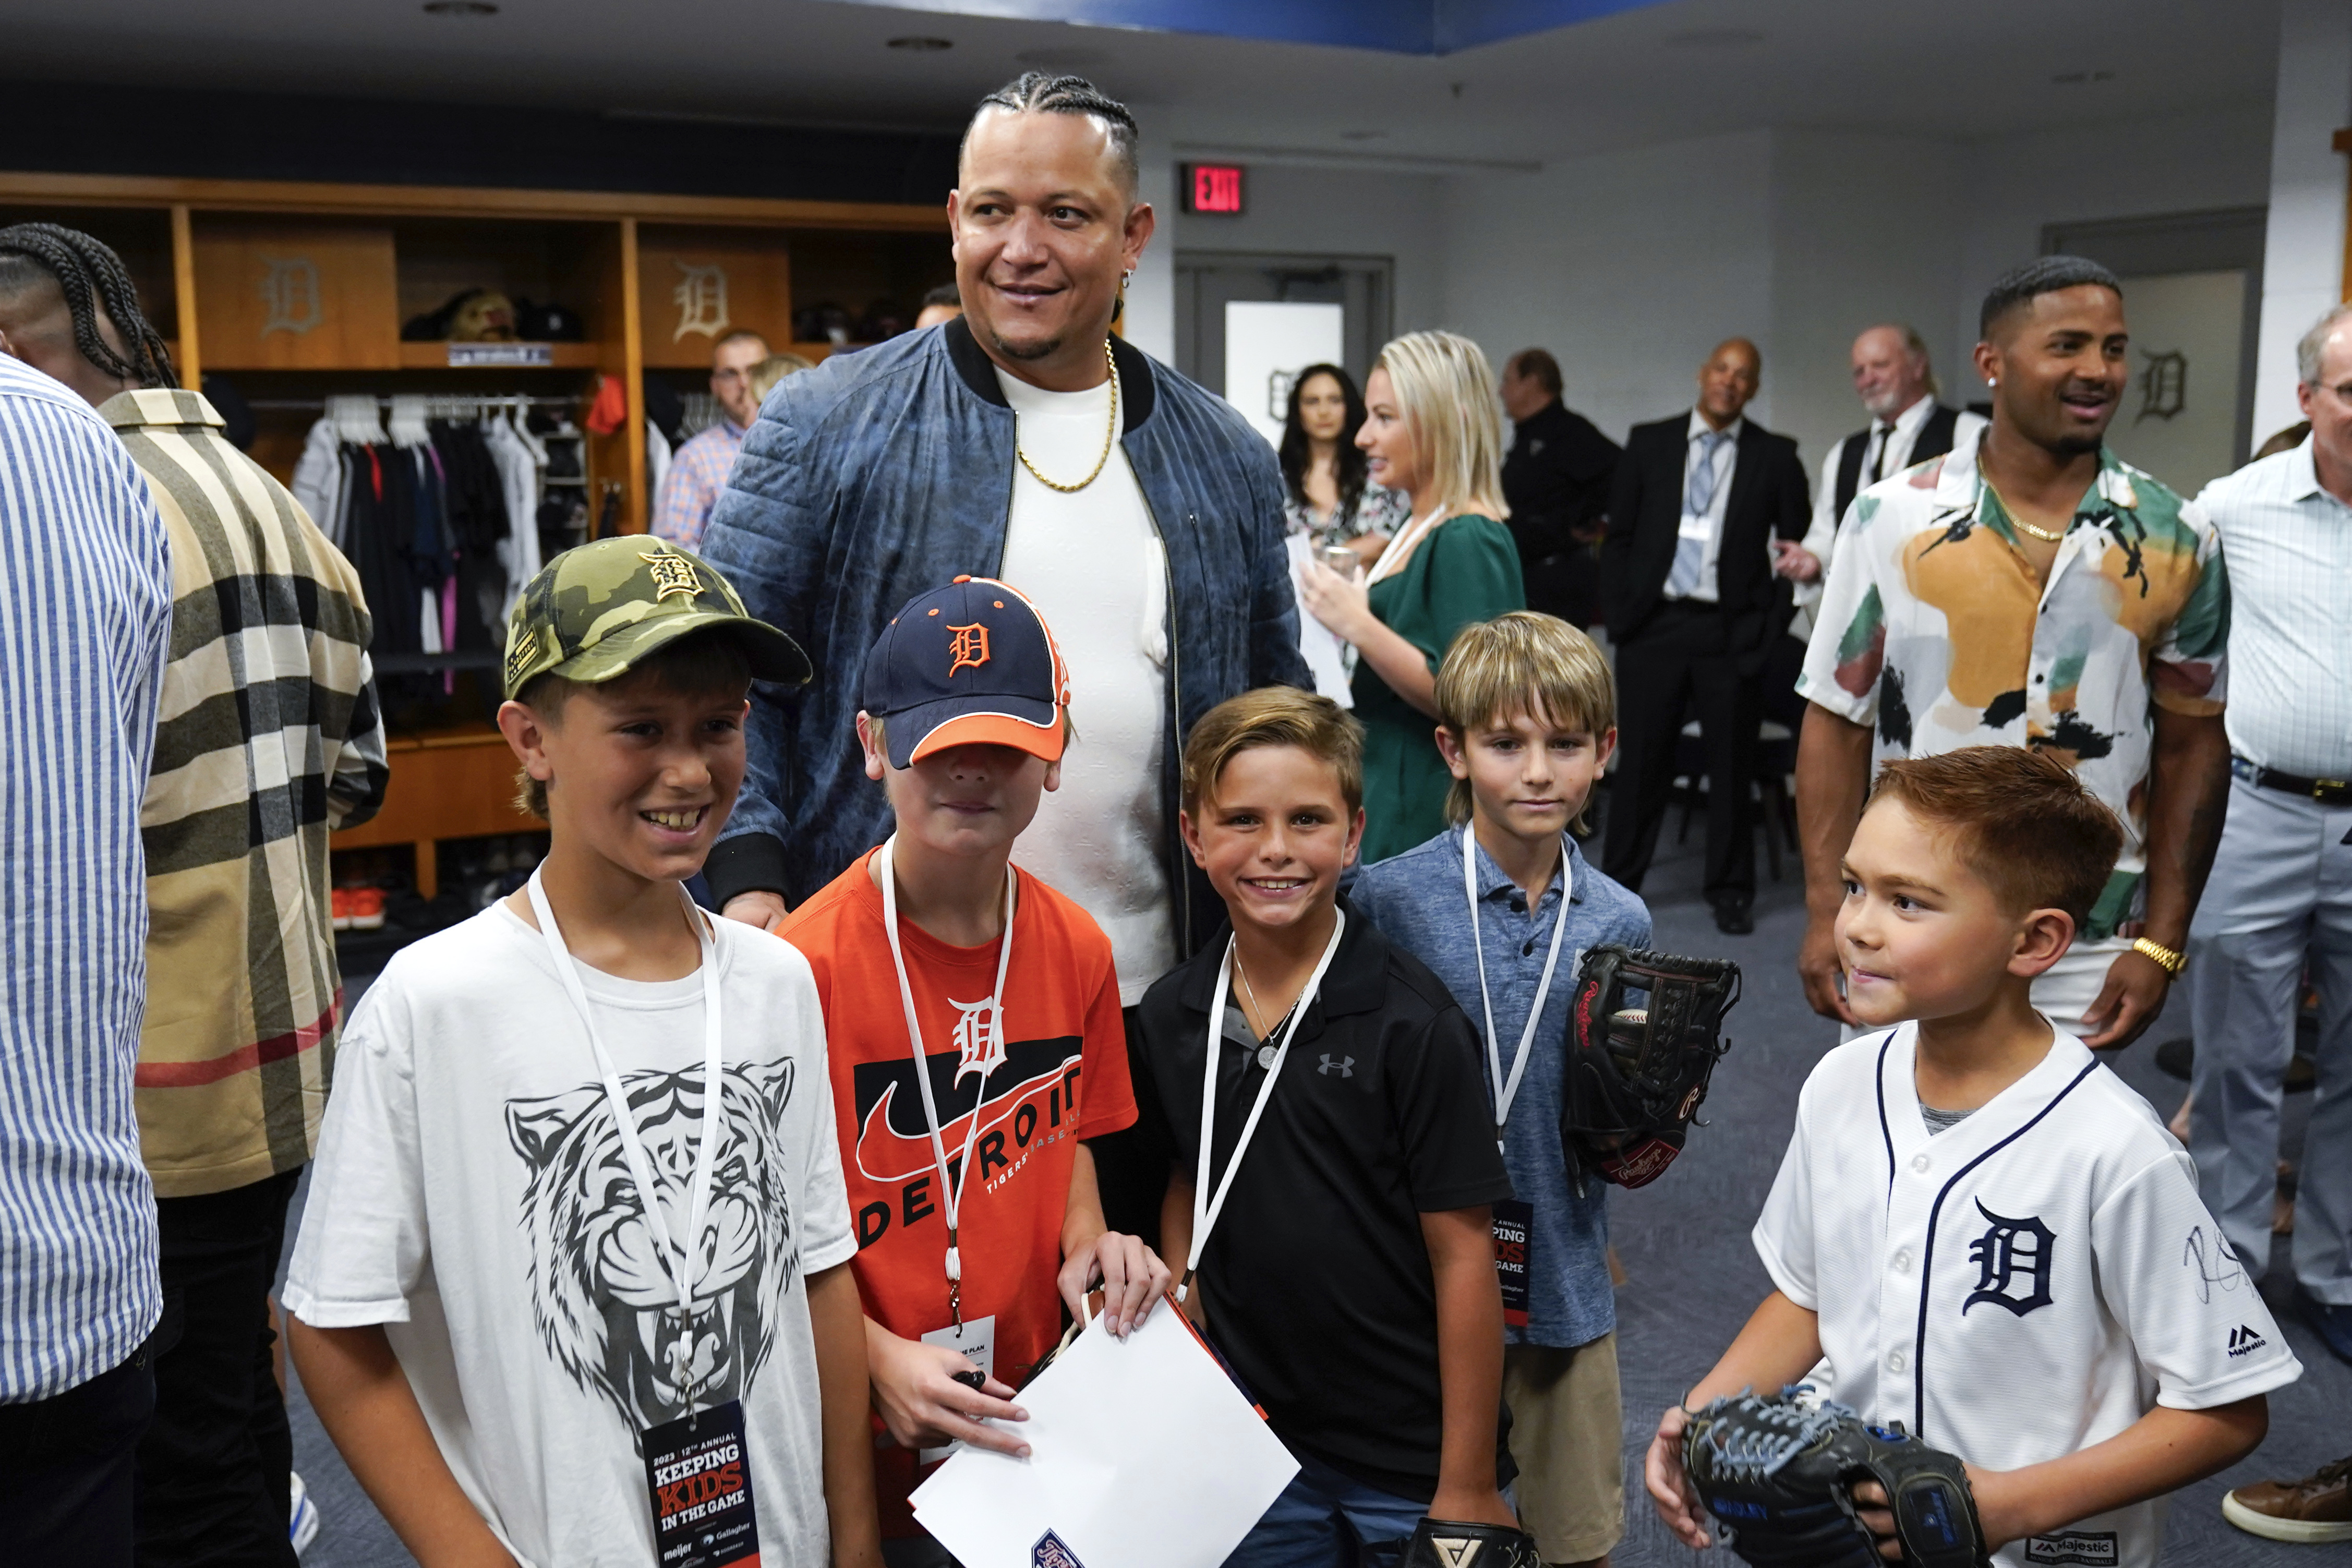 Helping Kids in Need Through Baseball - The Miguel Cabrera